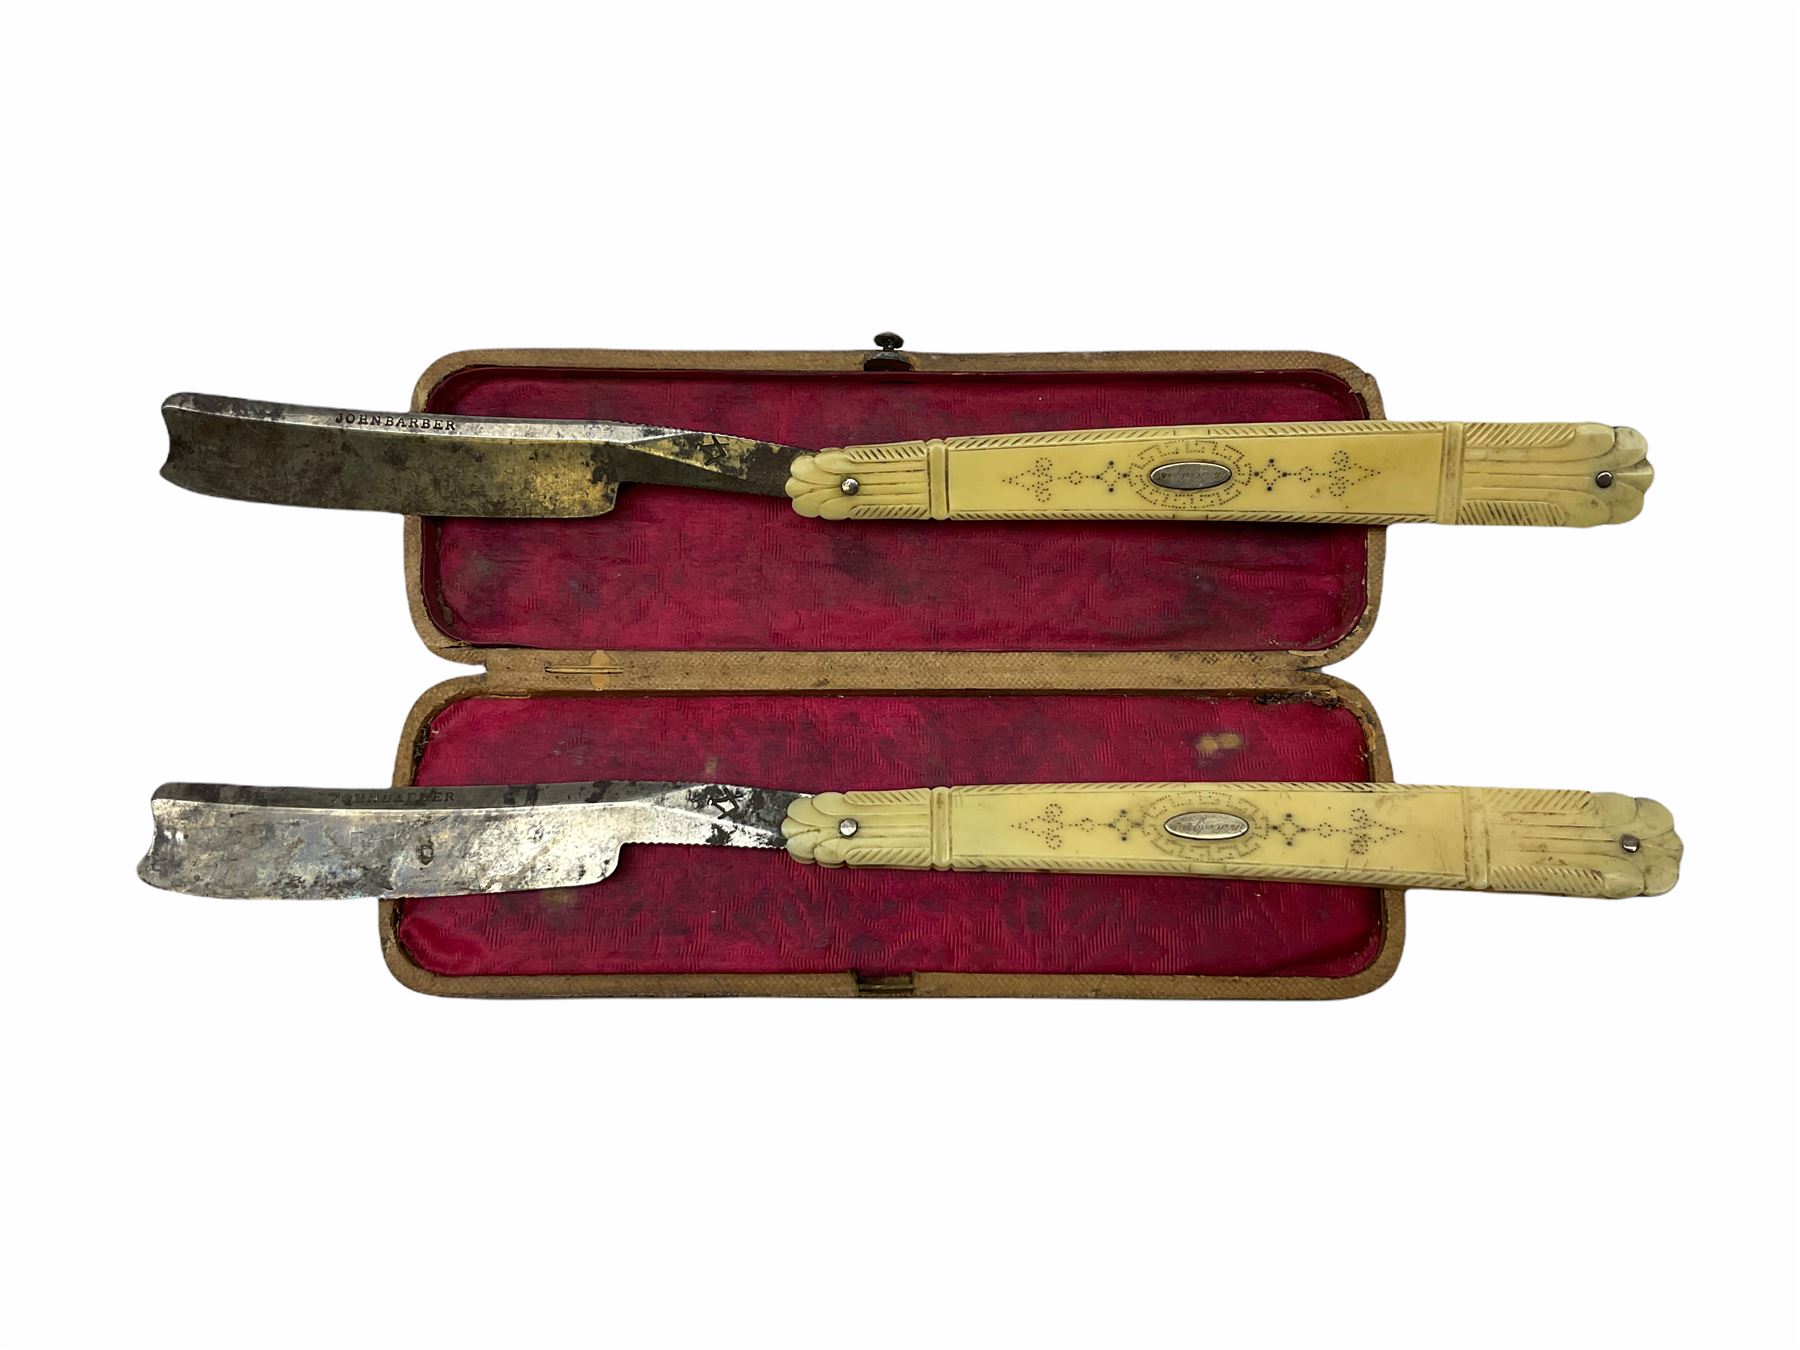 Pair of early 19th century John Barber ivory cut-throat razors with pique work decoration - Image 2 of 10